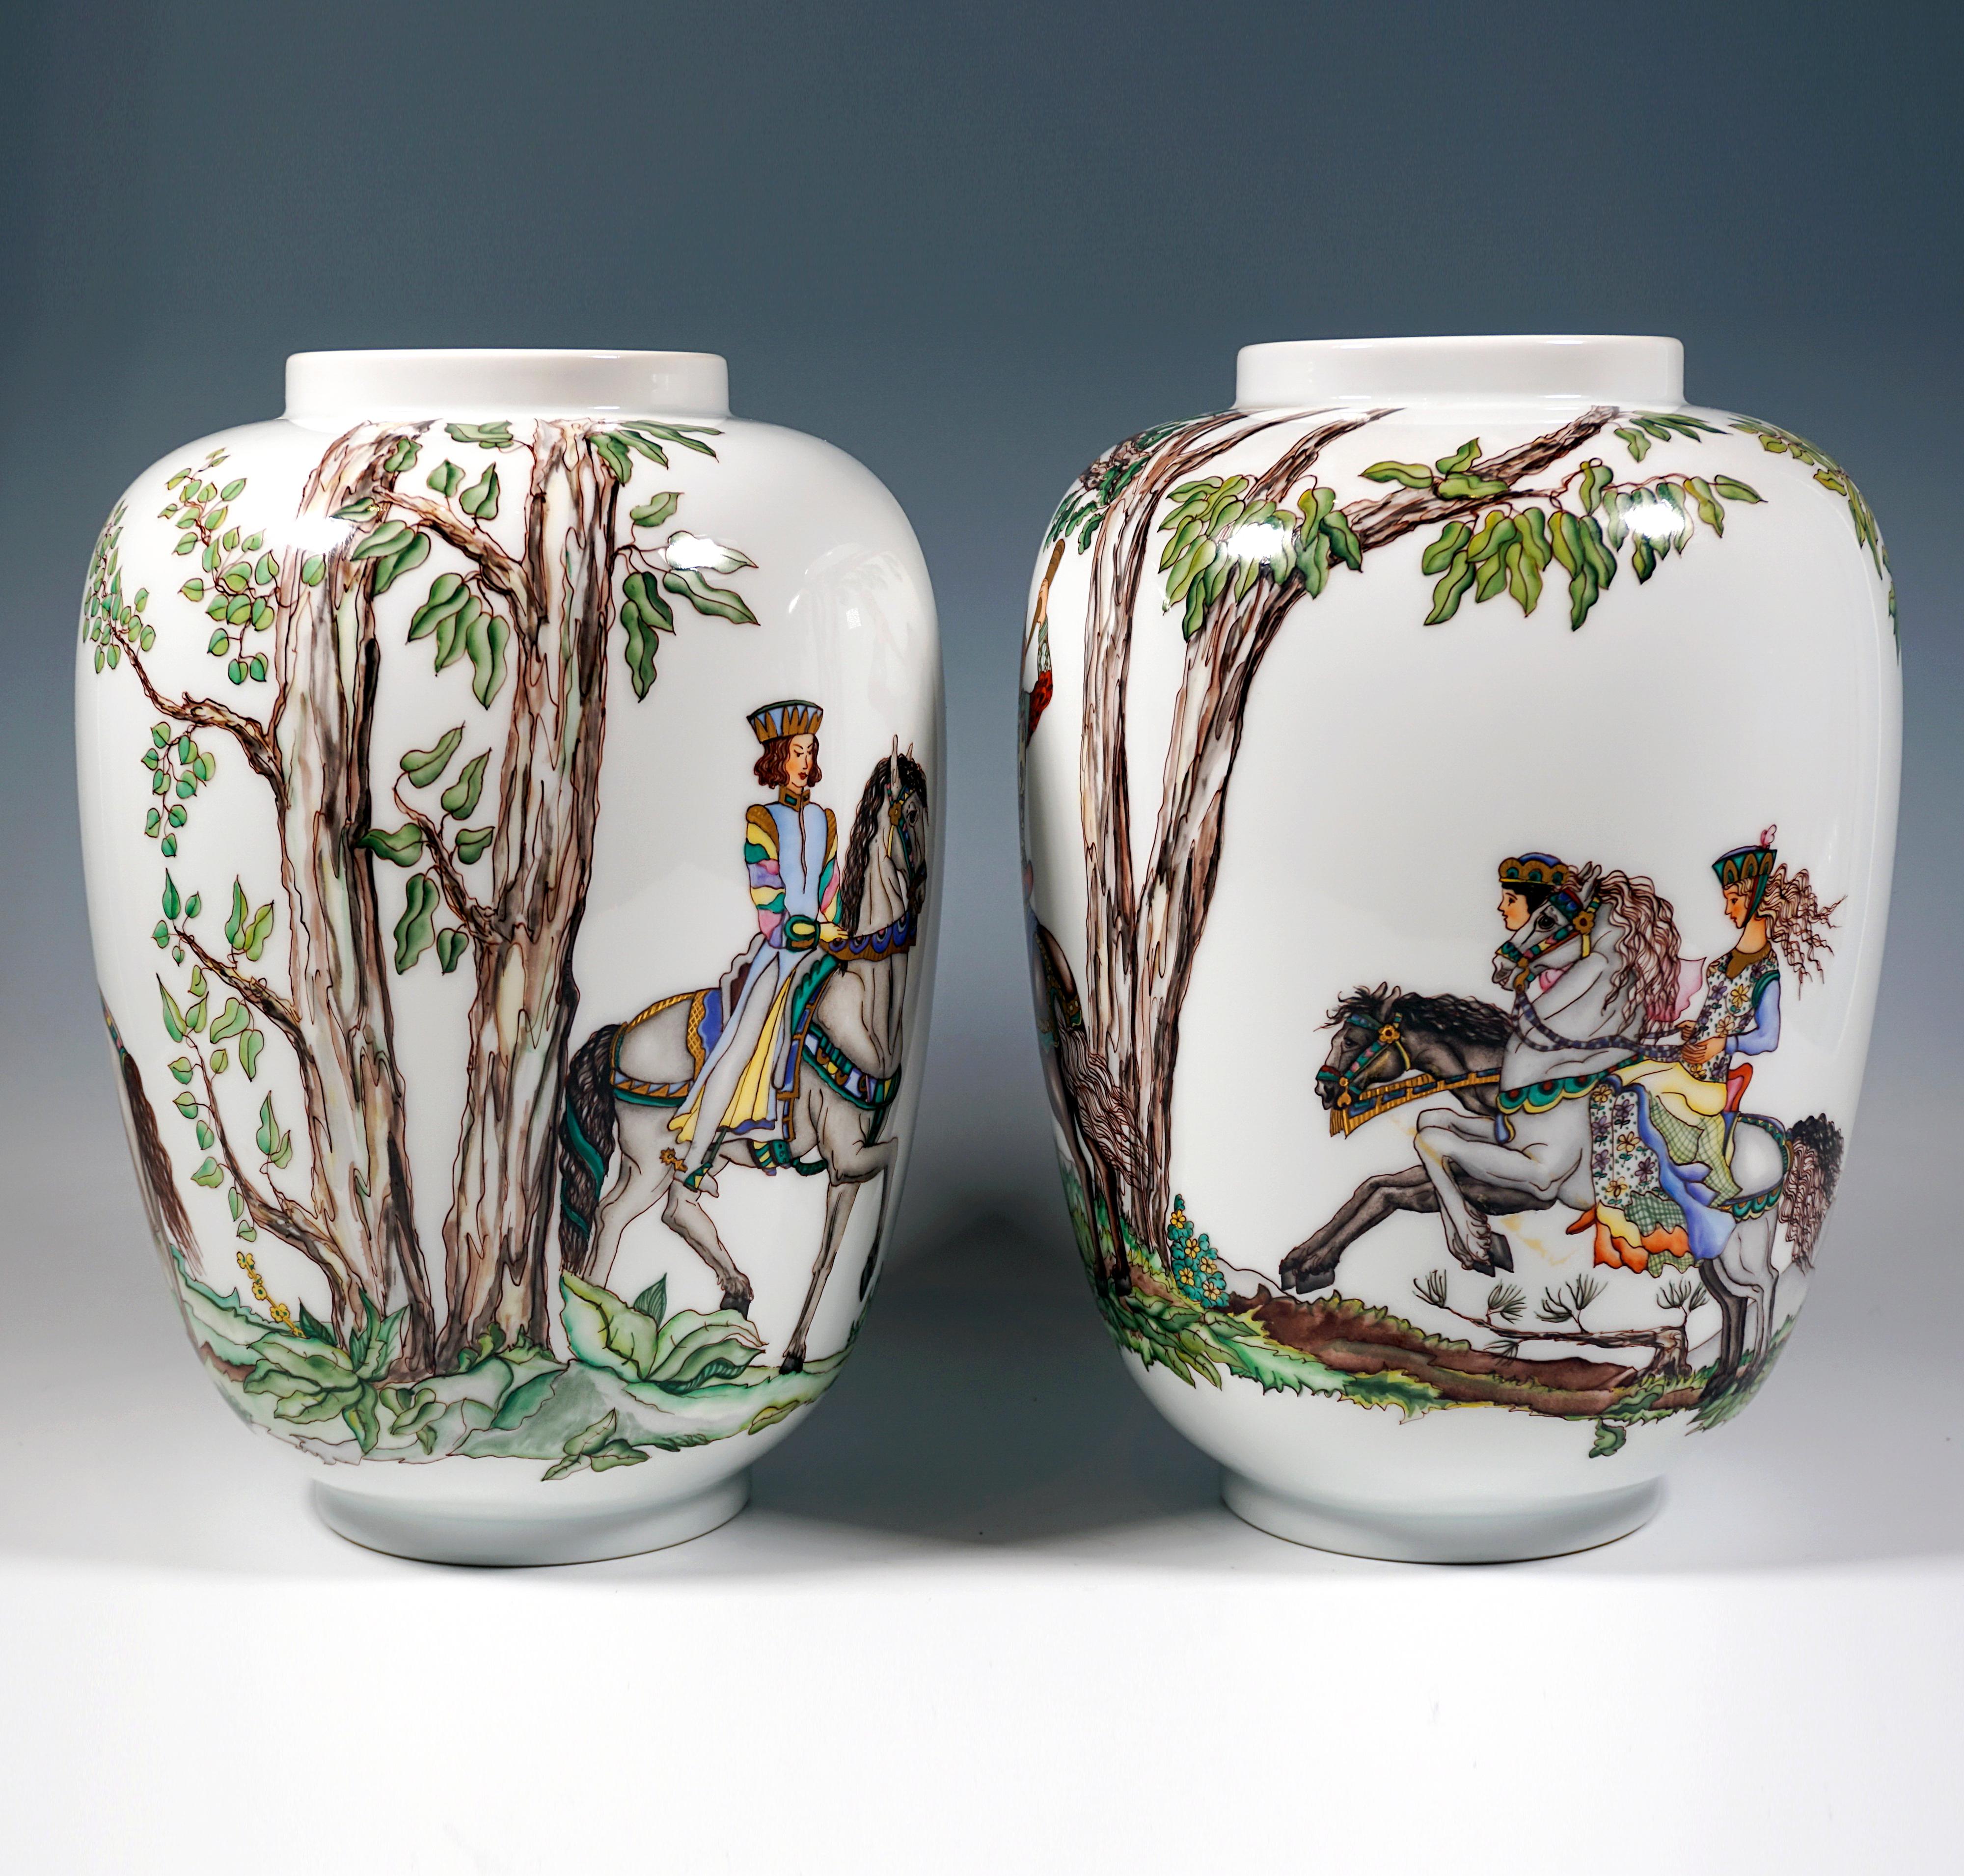 A pair of large porcelain vases with a large all-round depiction of a medieval falcon hunt on horseback in a wooded landscape against a mountainous background, noble, decorated figures on horses with elaborate harnesses painted in muted colours, a